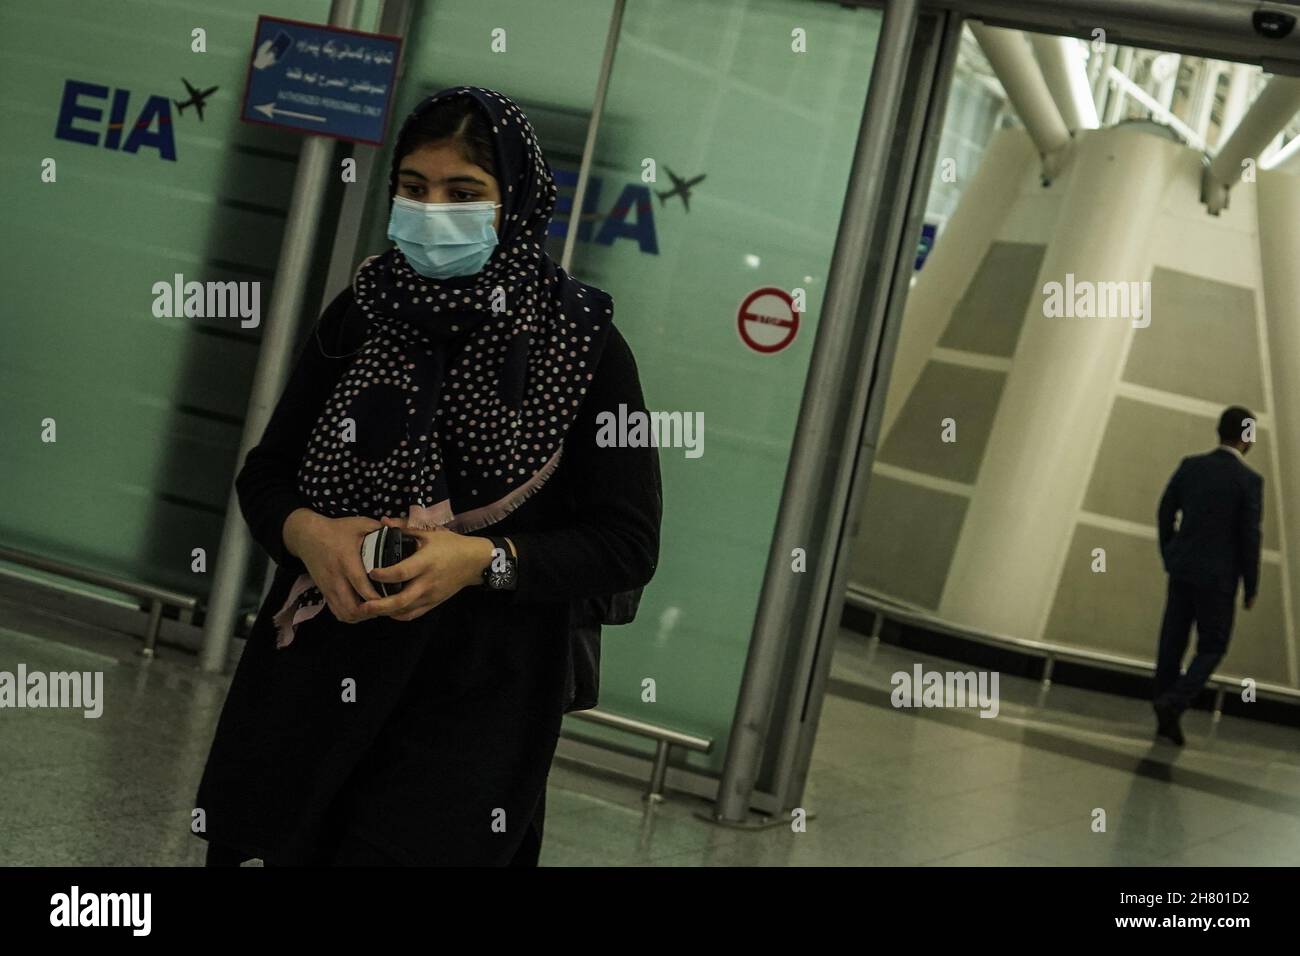 Erbil, Iraq. 26th Nov, 2021. An Iraqi young woman walks through the arrivals terminal at Erbil International Airport, after the landing of a repatriation flight carrying migrants who were stranded for weeks along the Polish-Belarusian borders. Credit: Ismael Adnan/dpa/Alamy Live News Stock Photo